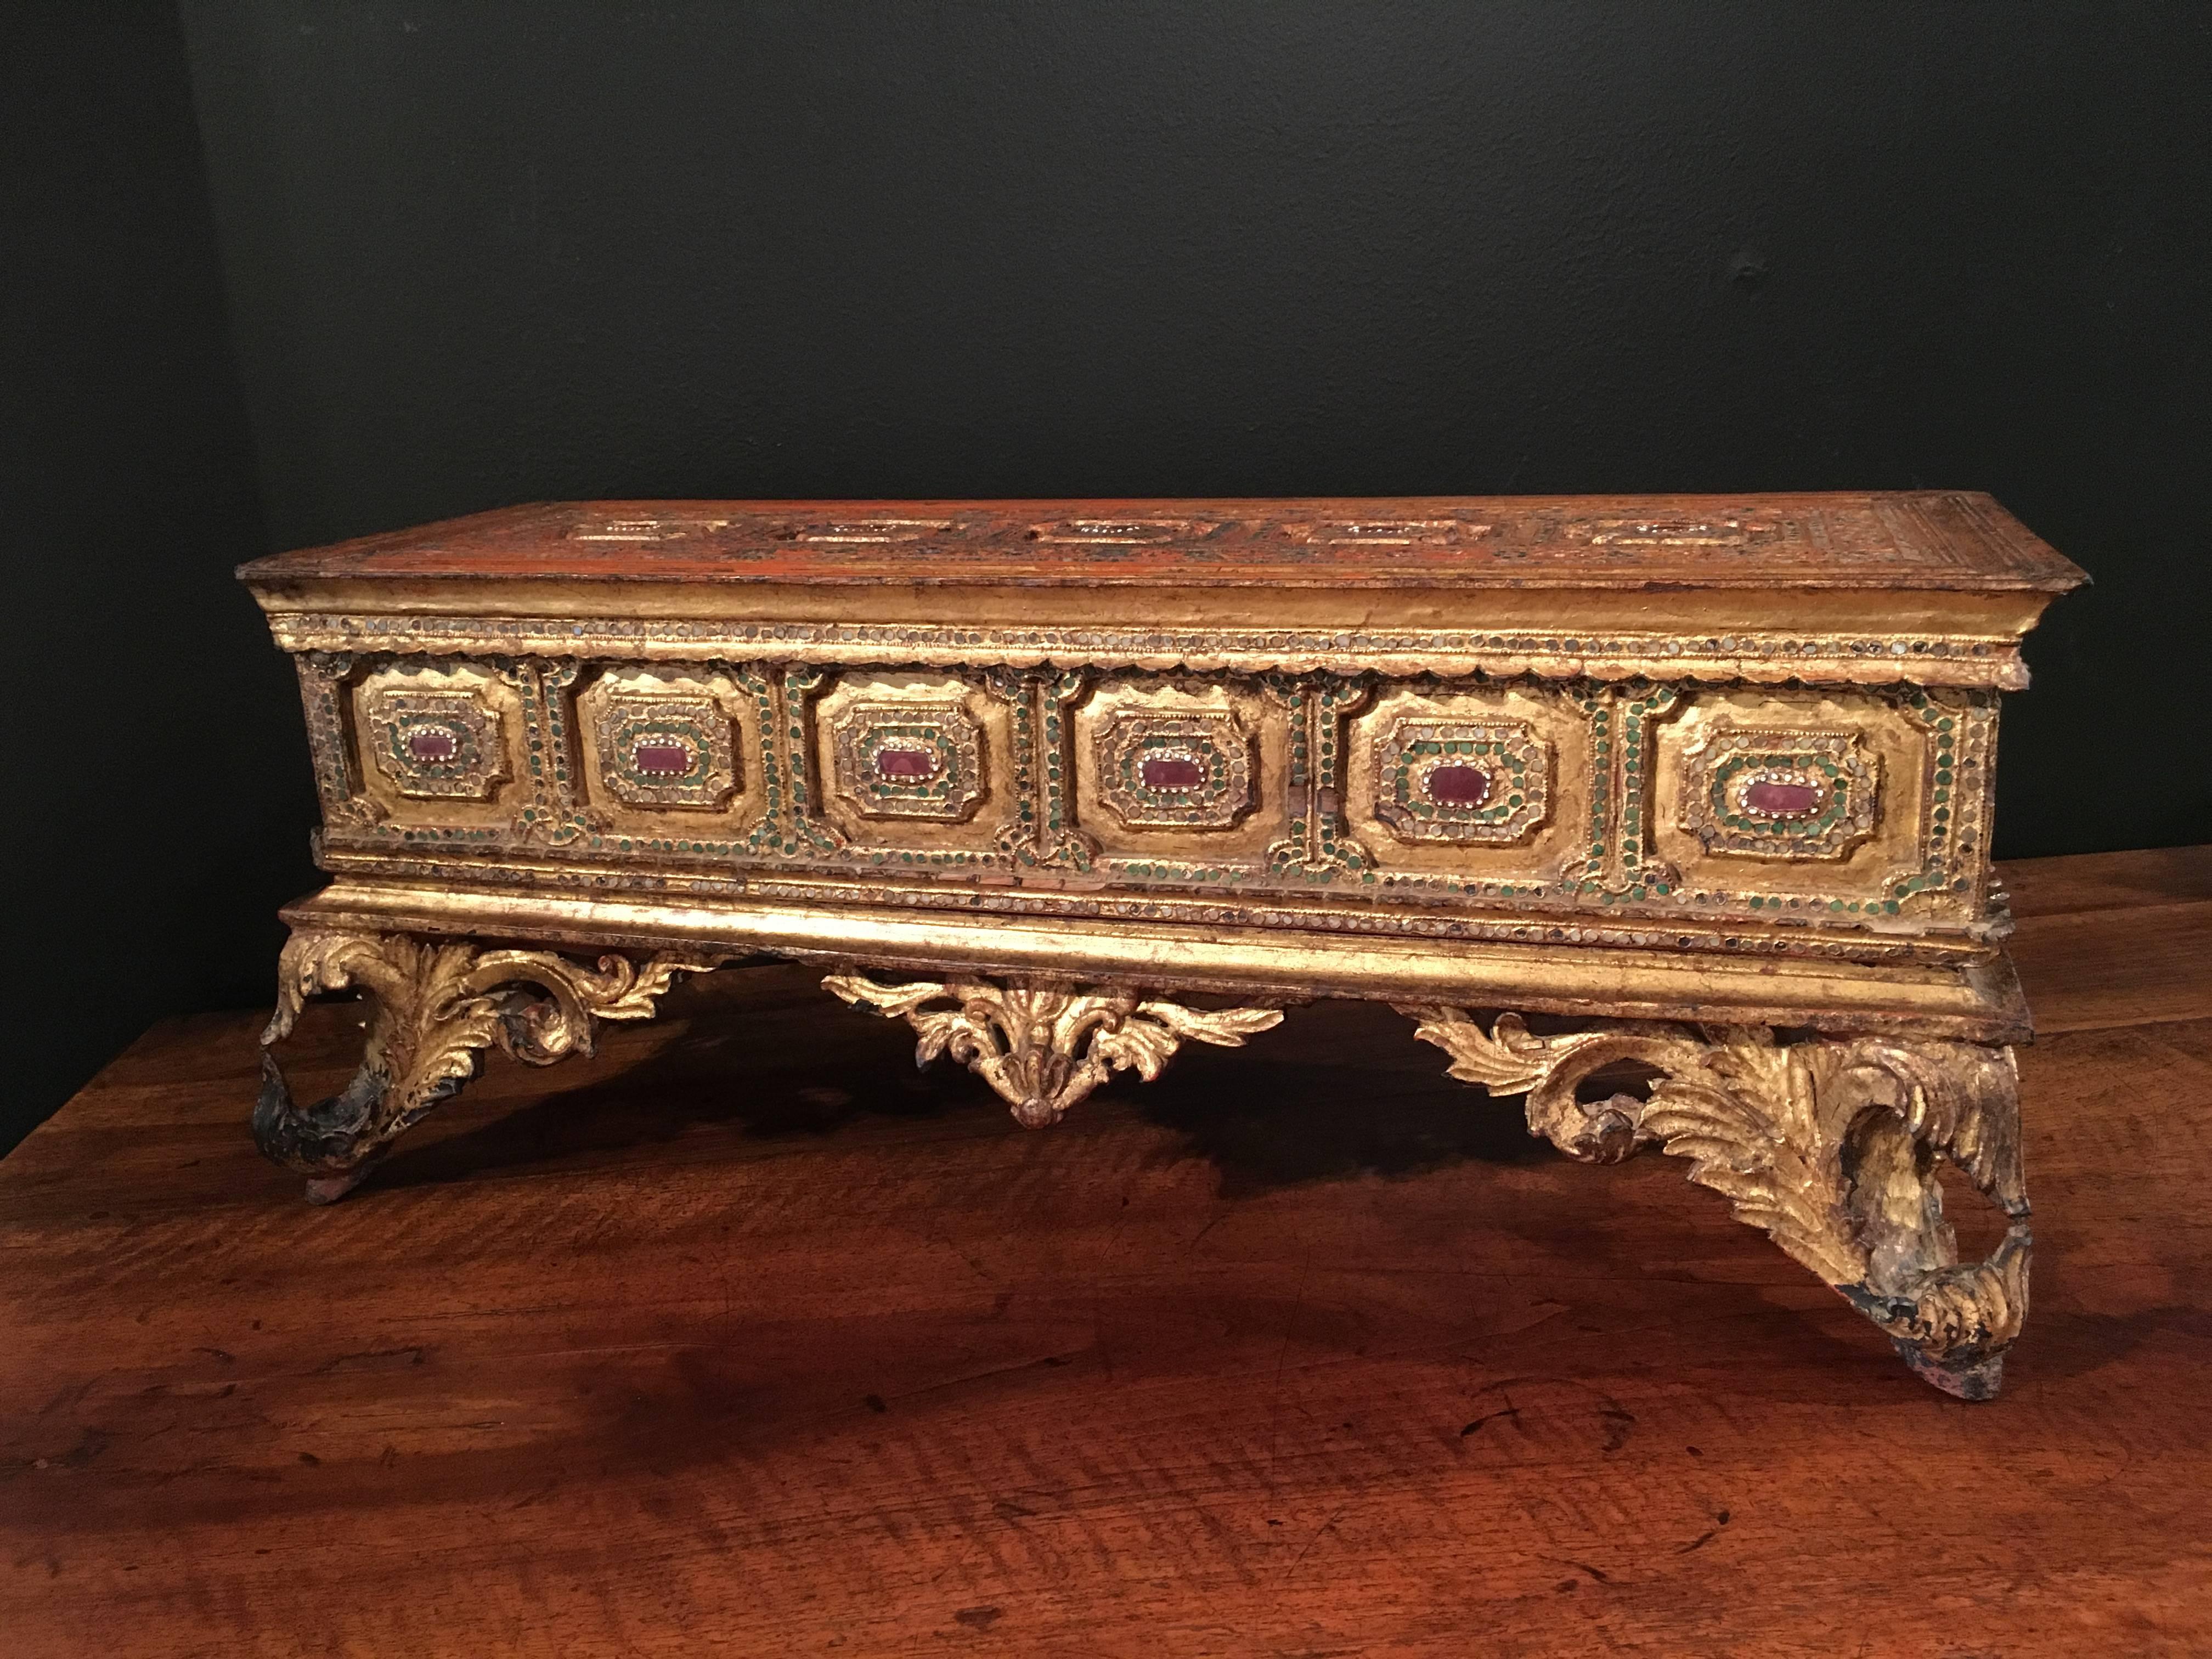 A gorgeous Burmese carved and gold leafed teakwood stand and cover for a kammavaca manuscript, late 18th or early 19th century, Burma.

The manuscript chest is heavily rococo influenced, speaking to the French presence in the region at the time. The